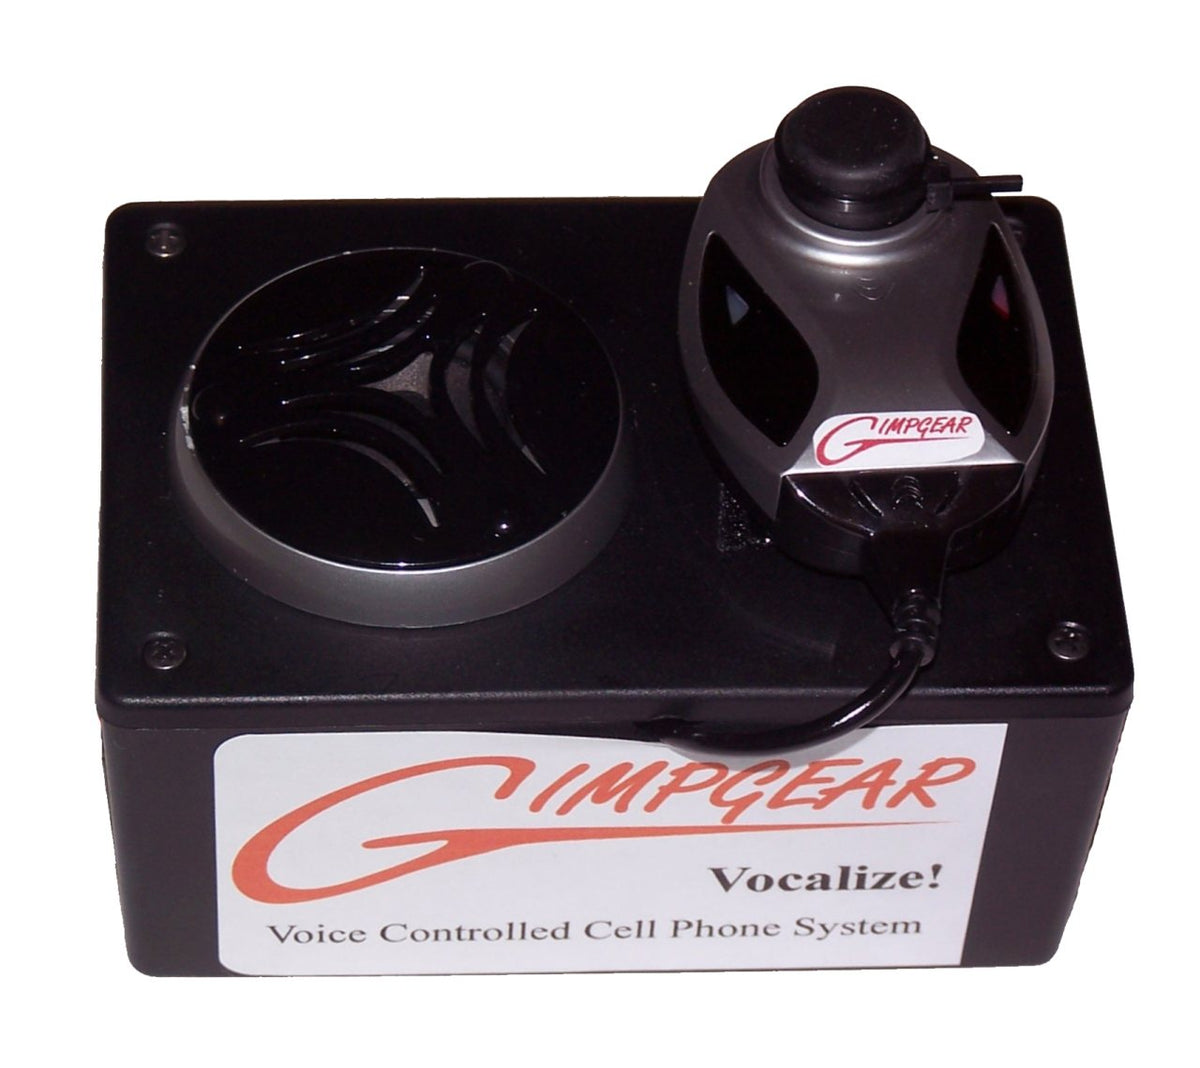 Vocalize Portable Cell Phone Voice Controller - Broadened Horizons Direct